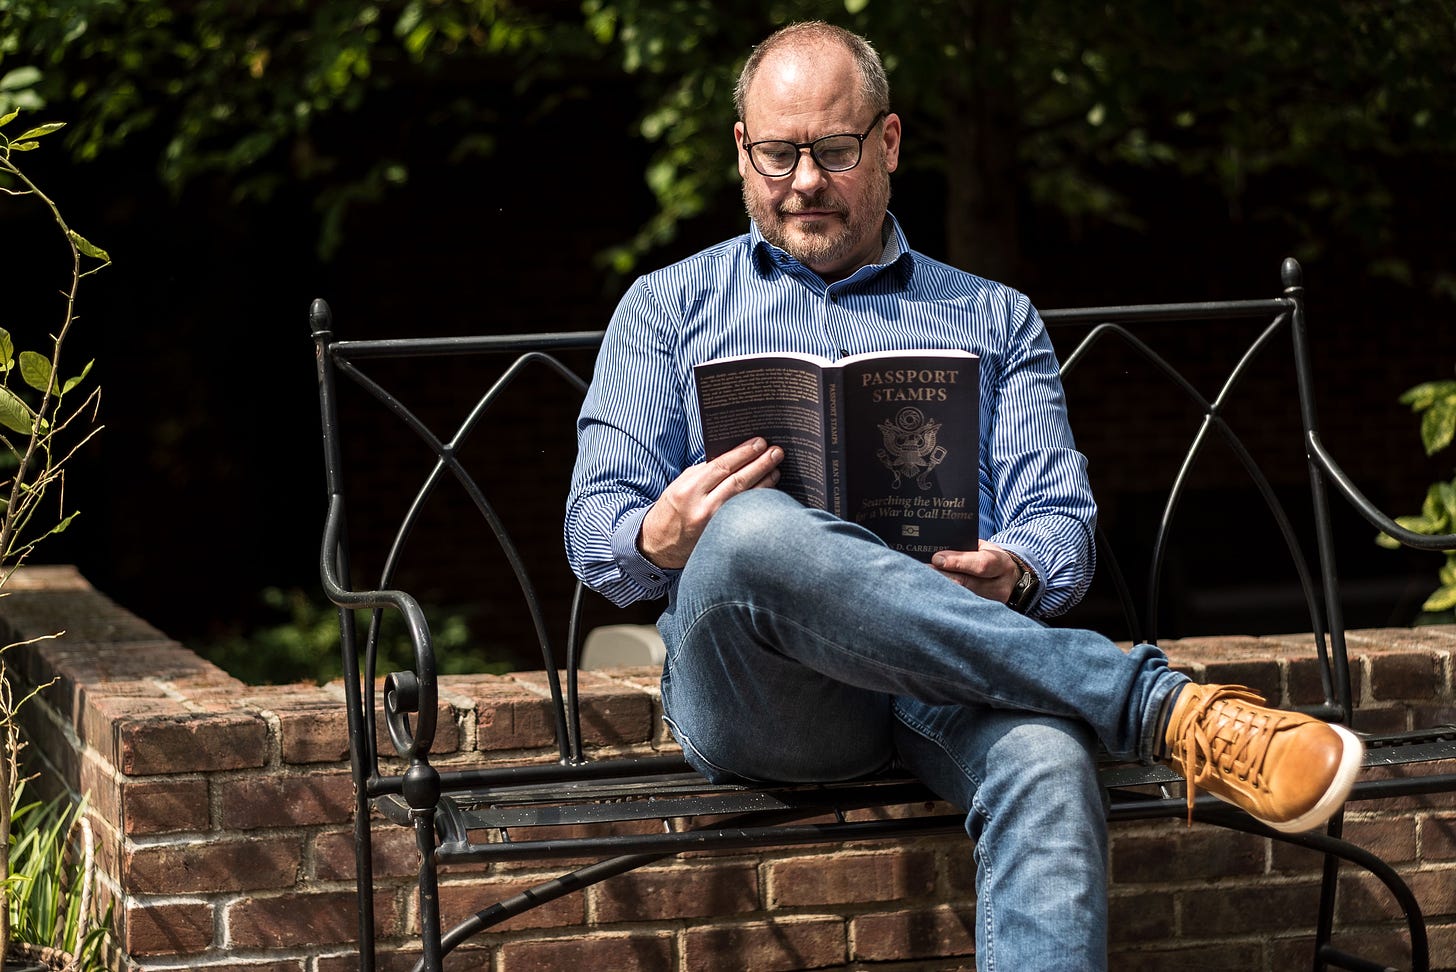 Photo of Sean Carberry sitting on a metal bench by a small brick wall and trees reading a copy of the book Passport Stamps